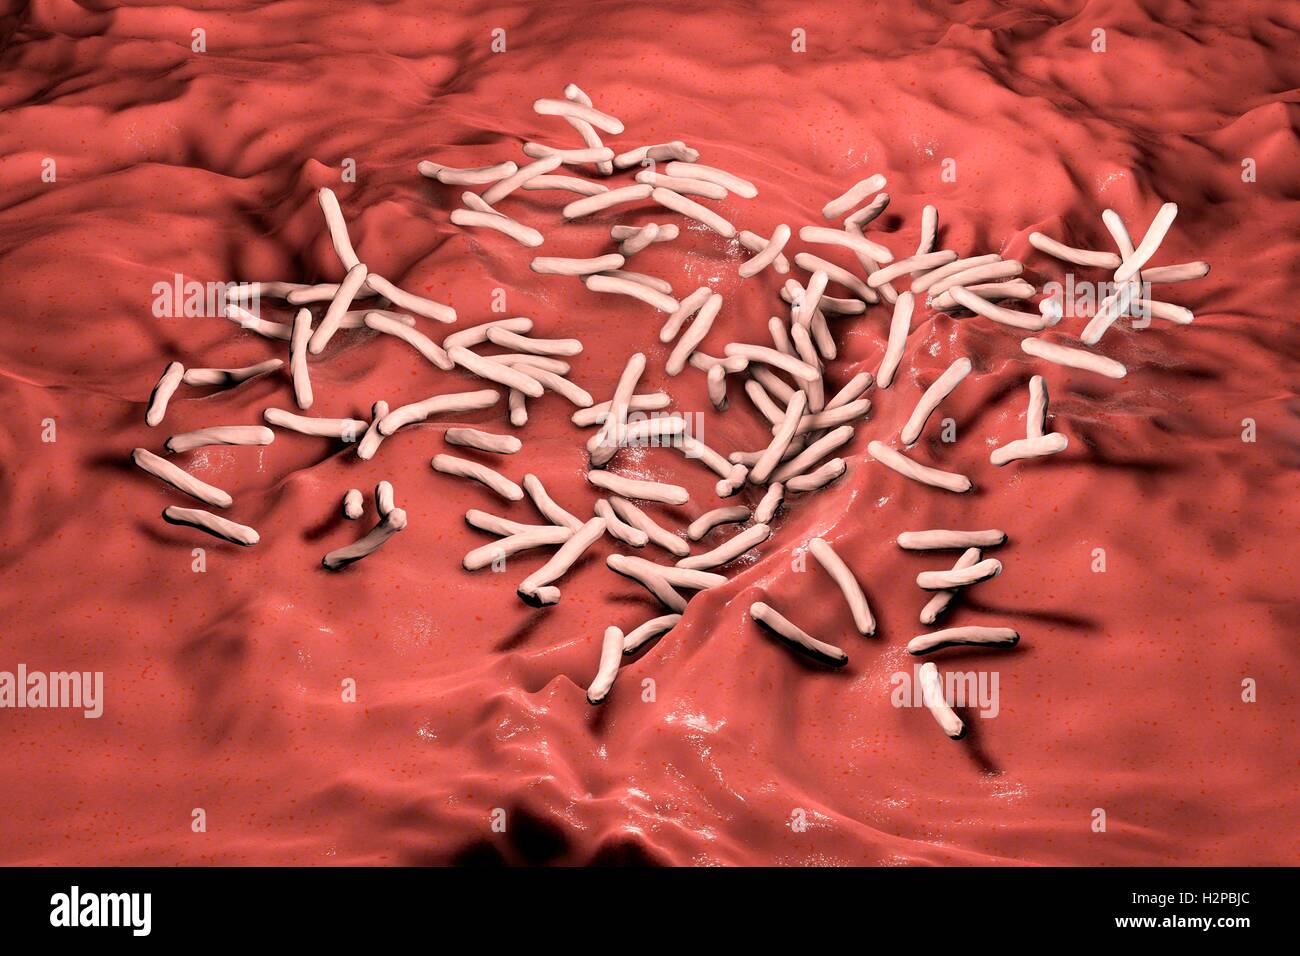 Tuberculosis bacteria. Computer artwork of Mycobacterium tuberculosis bacteria, the Gram-positive rod-shaped bacteria which cause the disease tuberculosis. Stock Photo